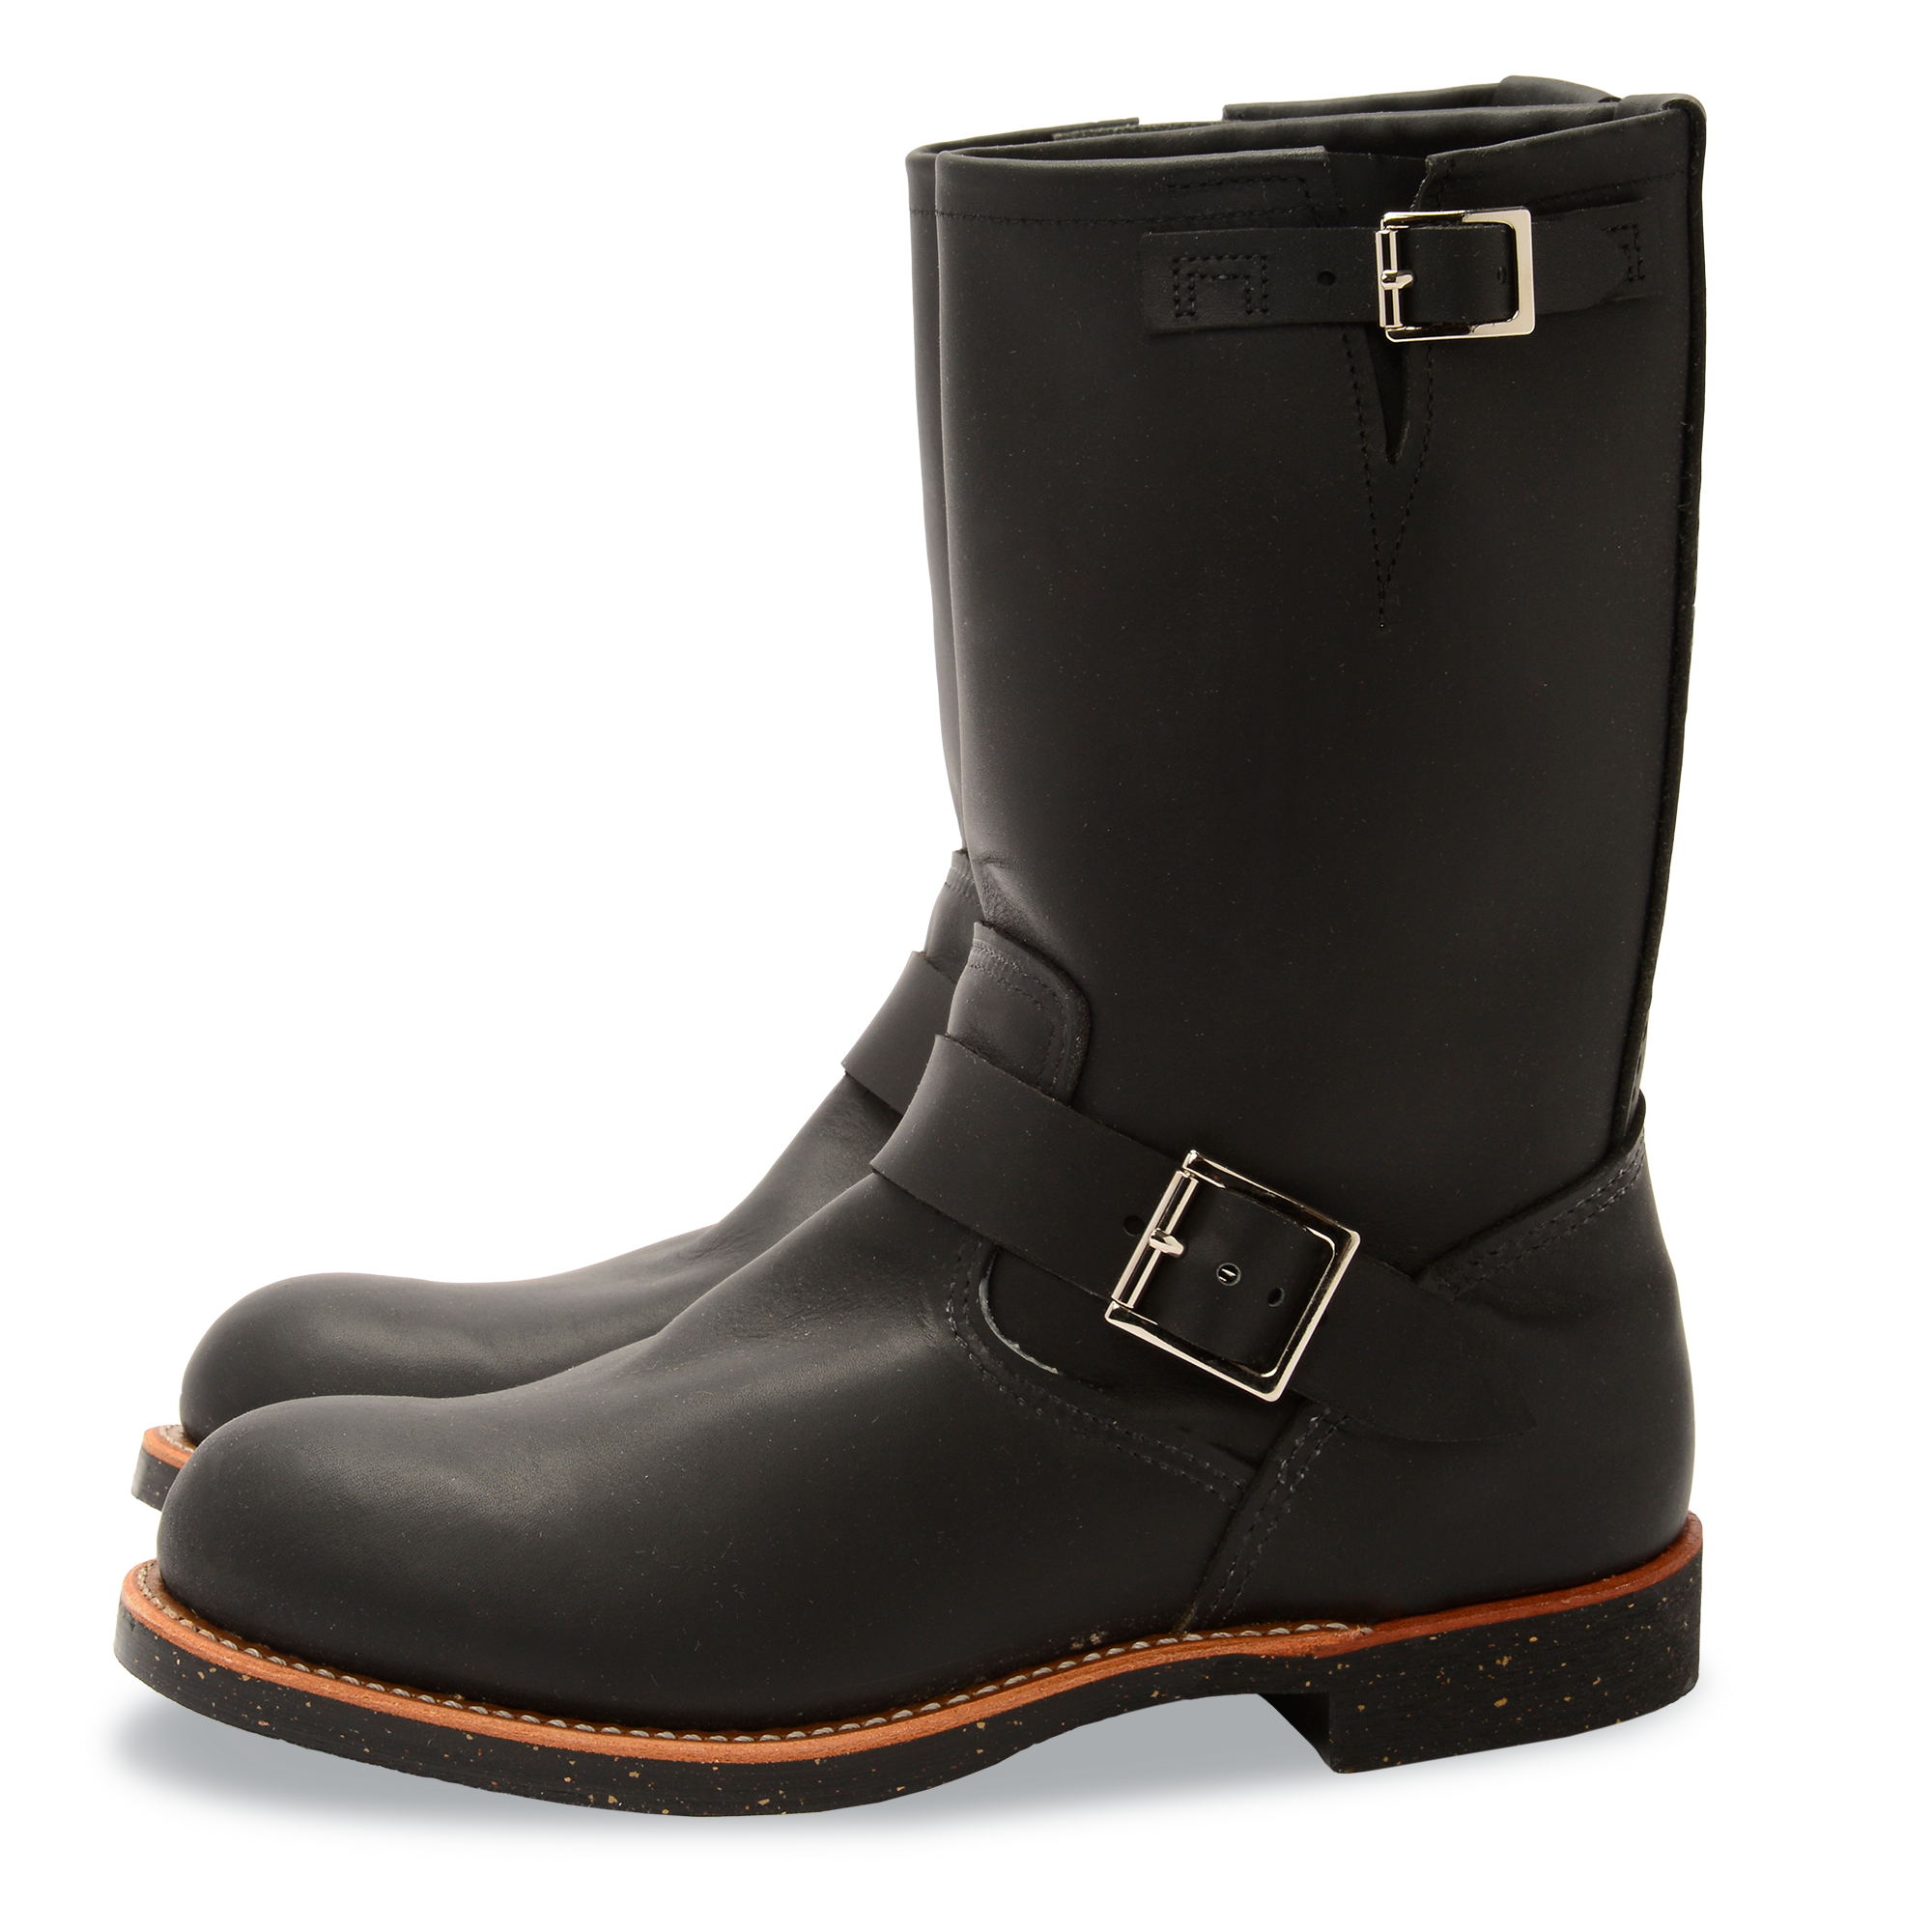 Black Redwing engineer boots